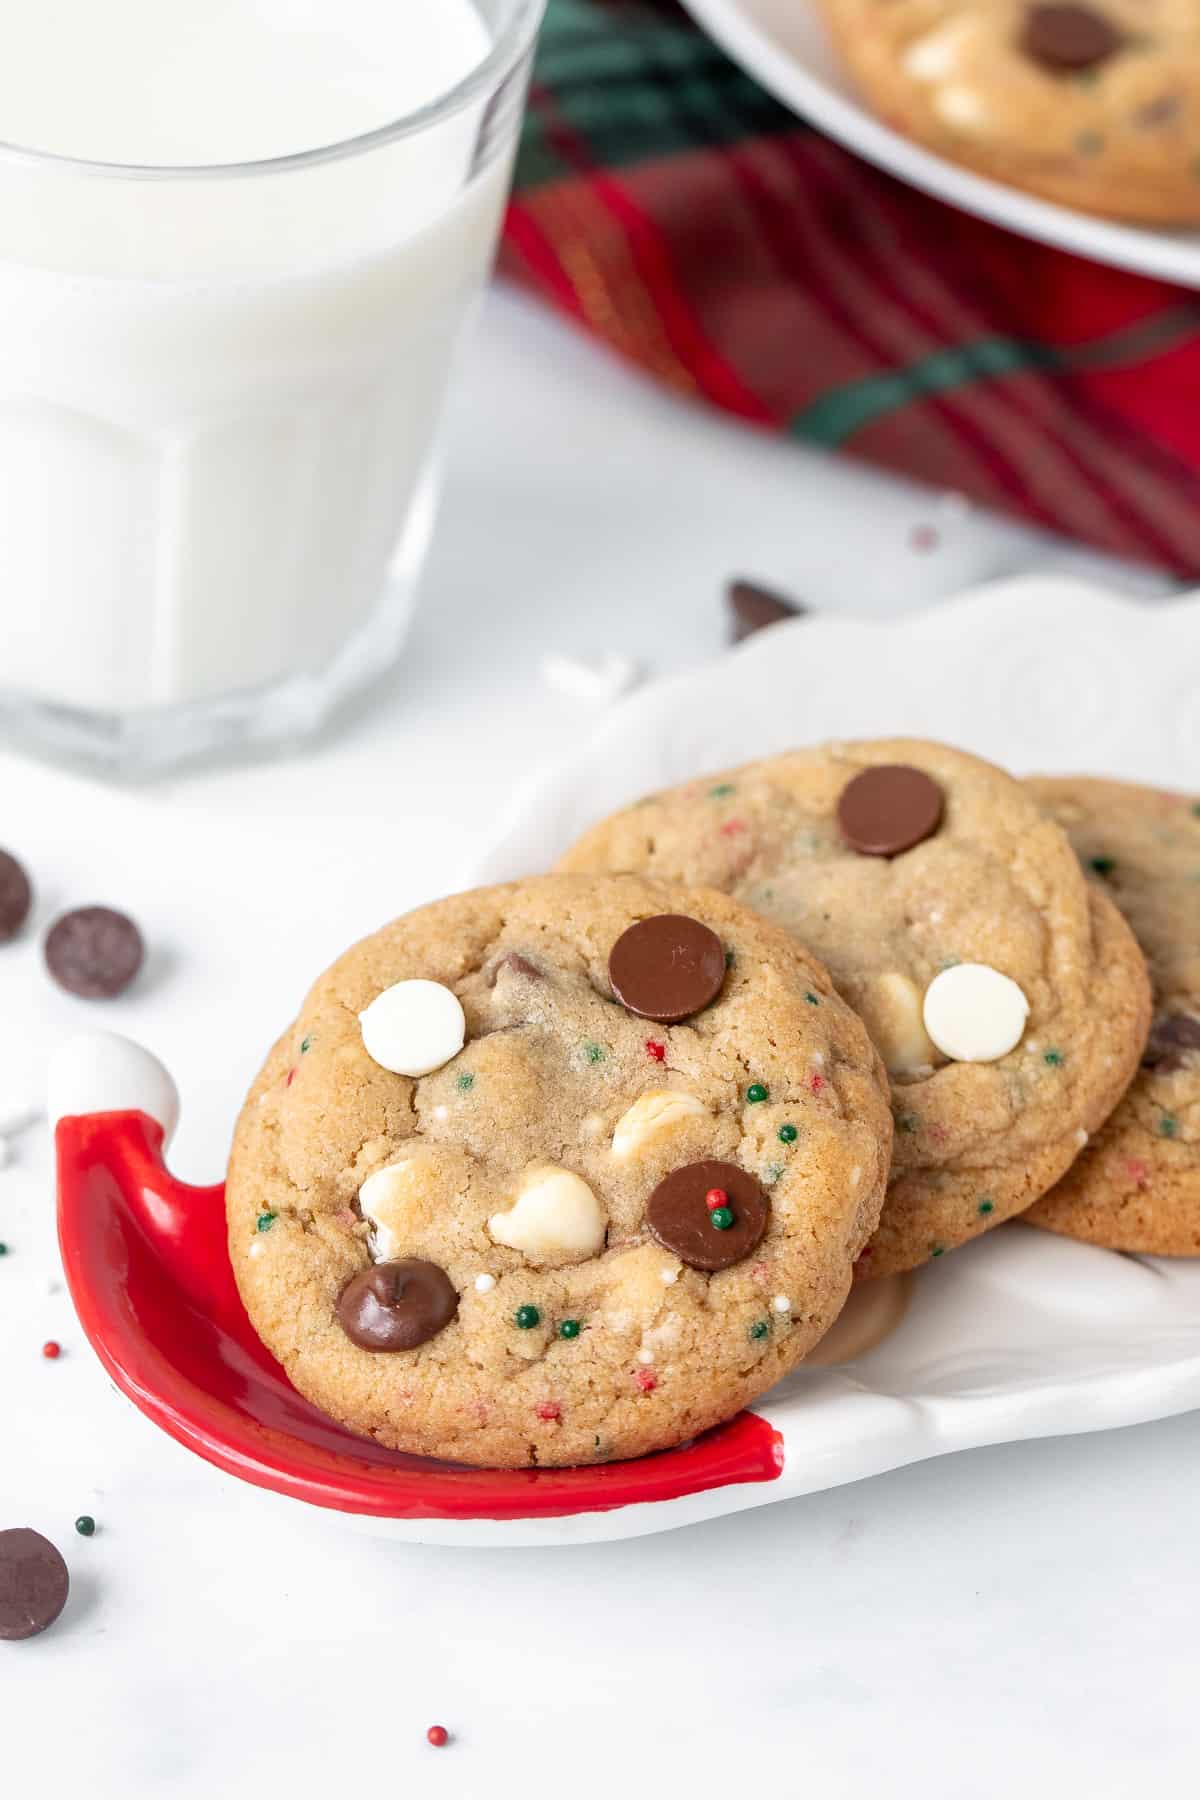 Small Santa plate of chocolate chip cookies with sprinkles and a glass of milk